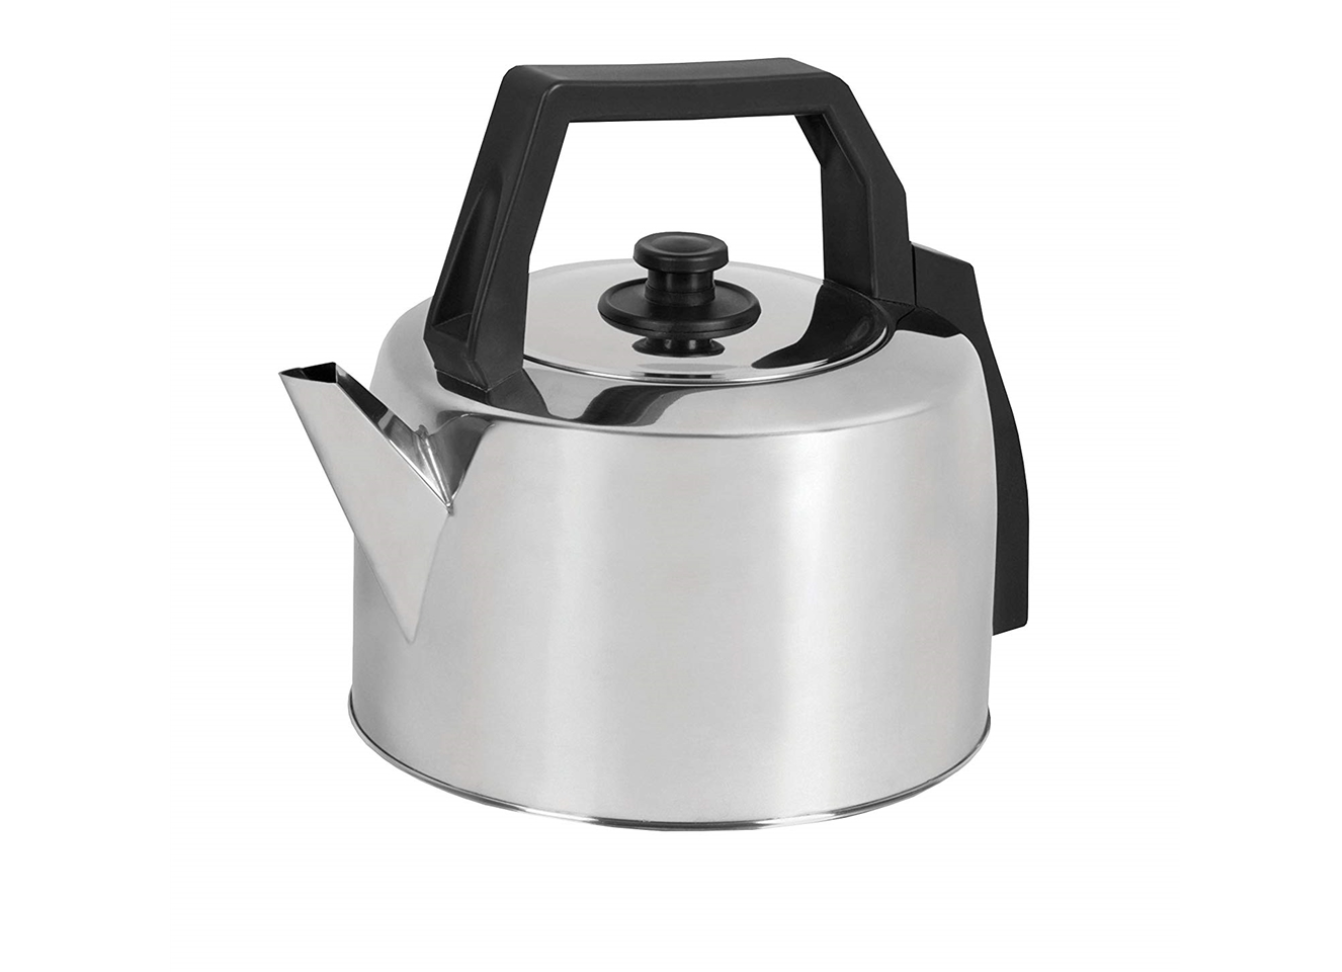 Swan Stainless Steel Catering Kettle (An In-depth Review)